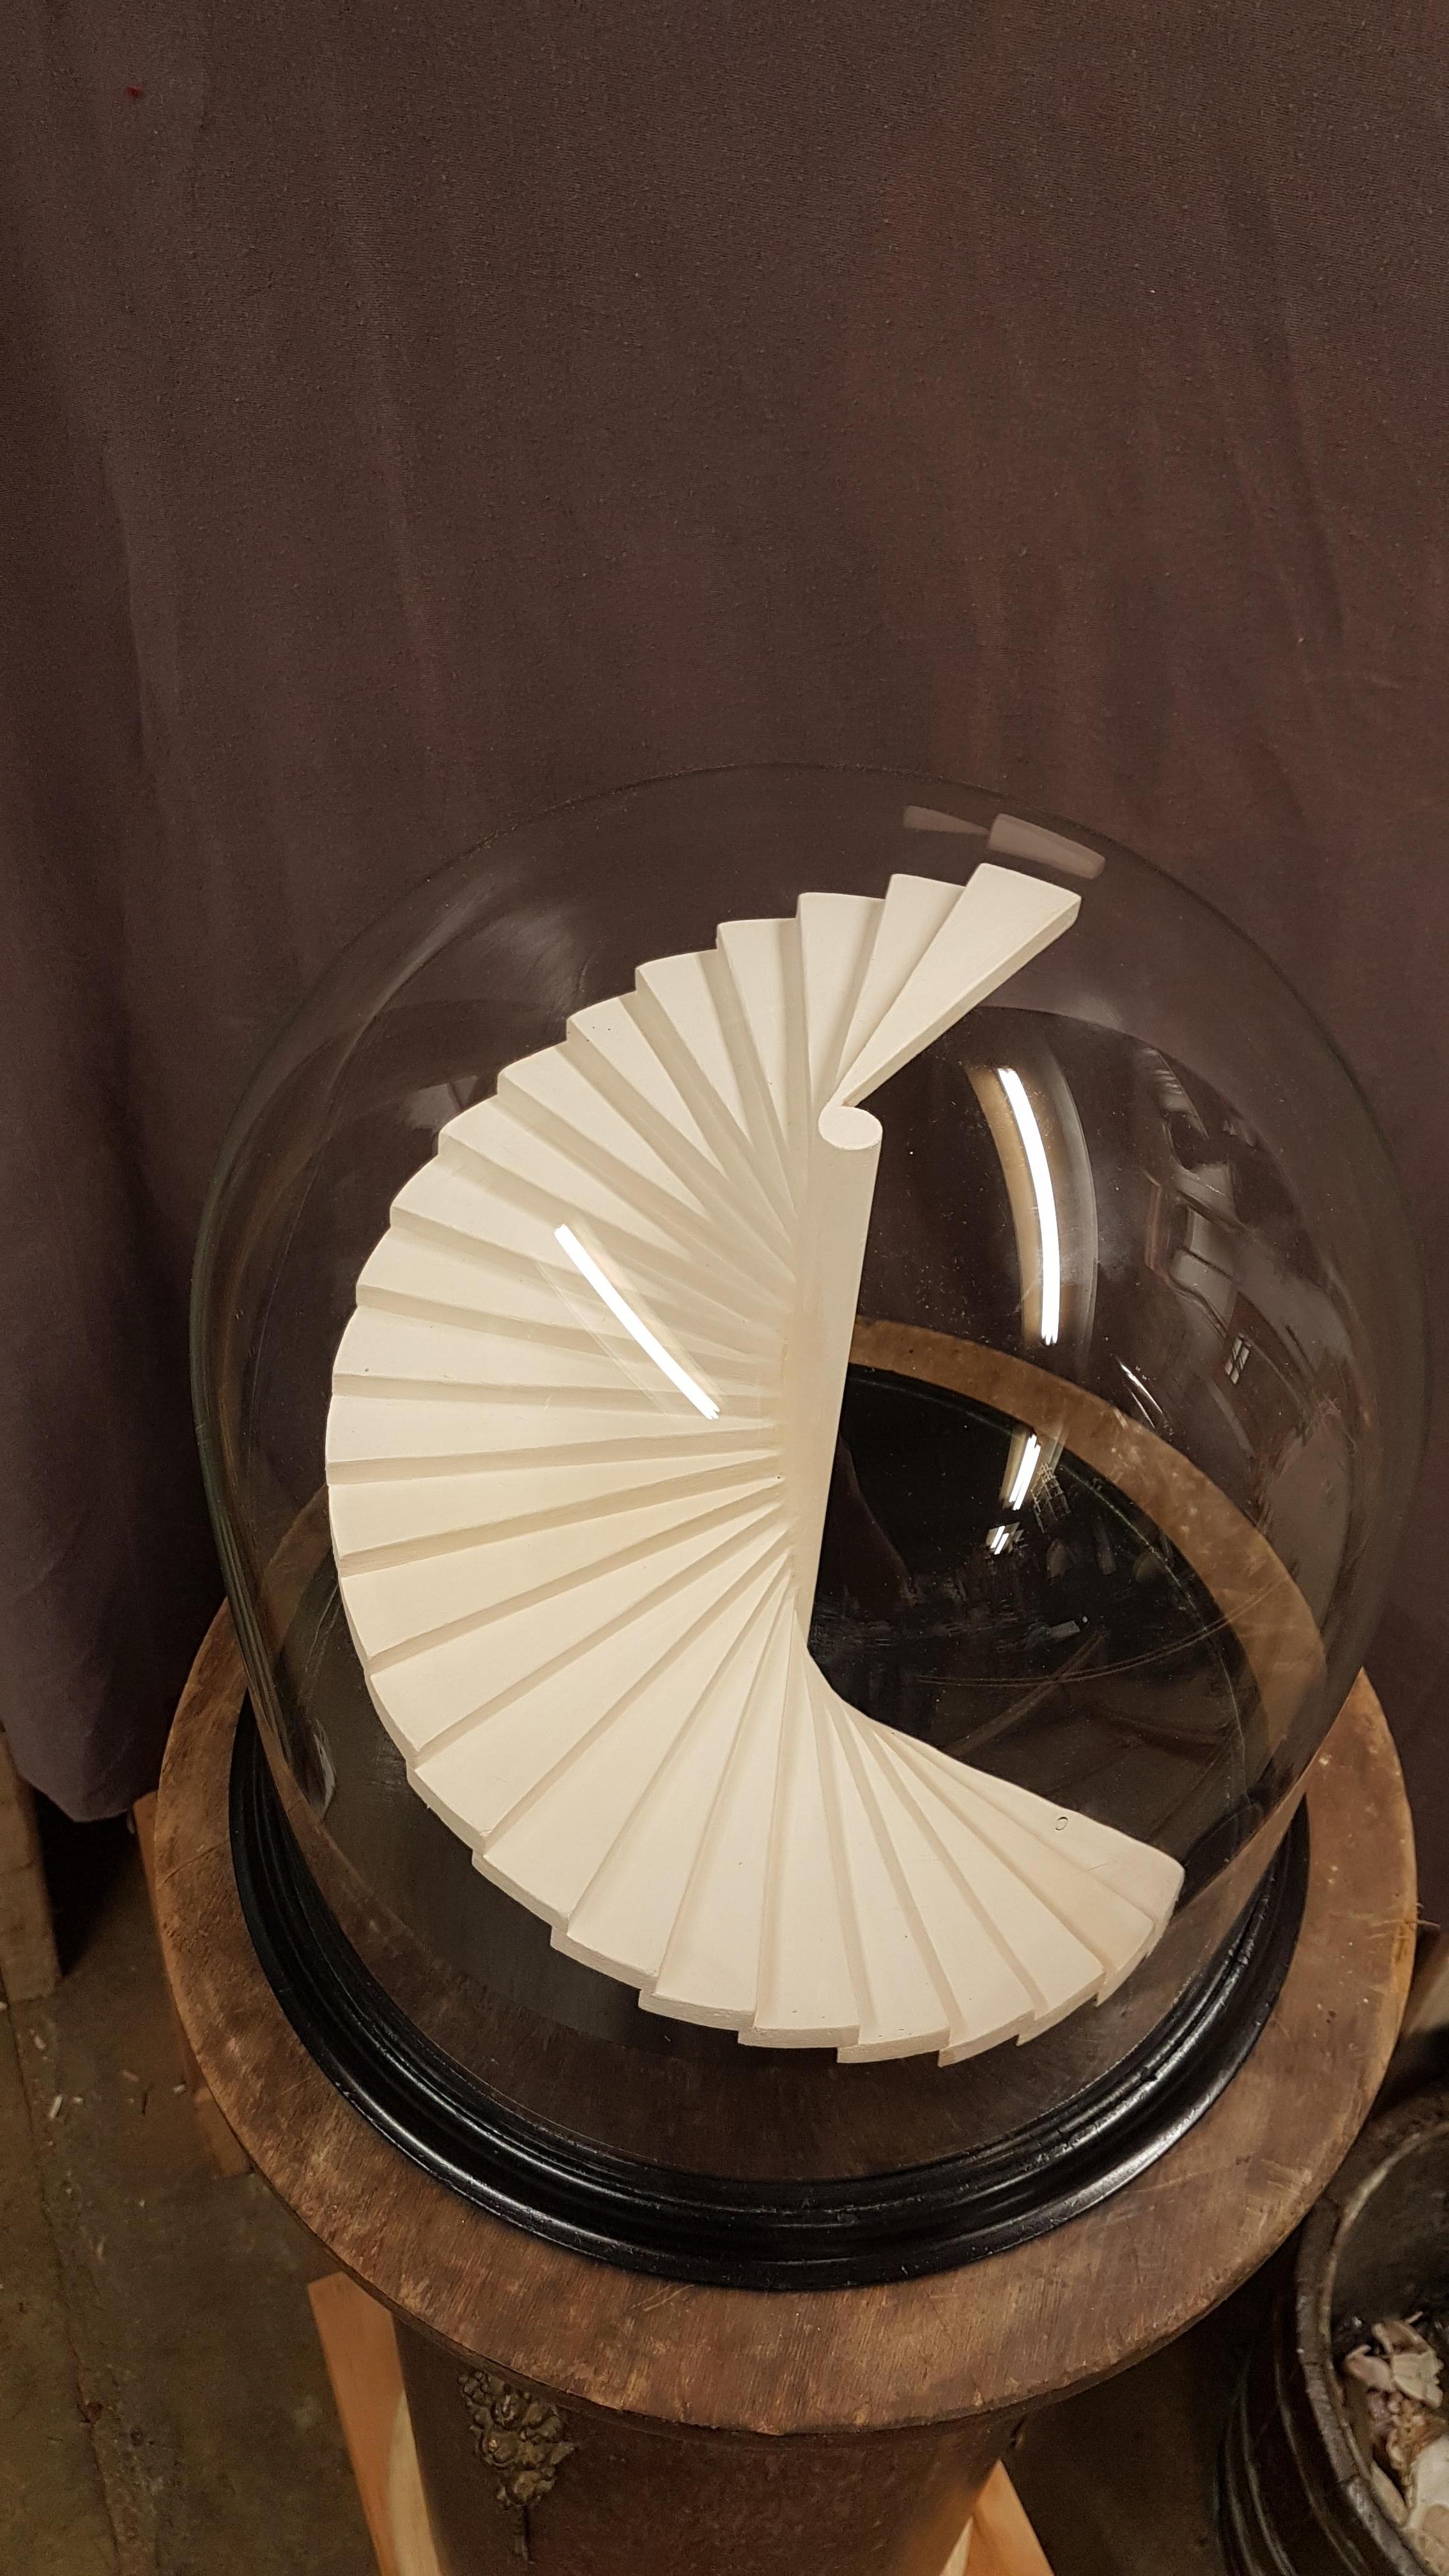 Glazed 19th Century Glass Dome with Bespoke Miniature Staircase